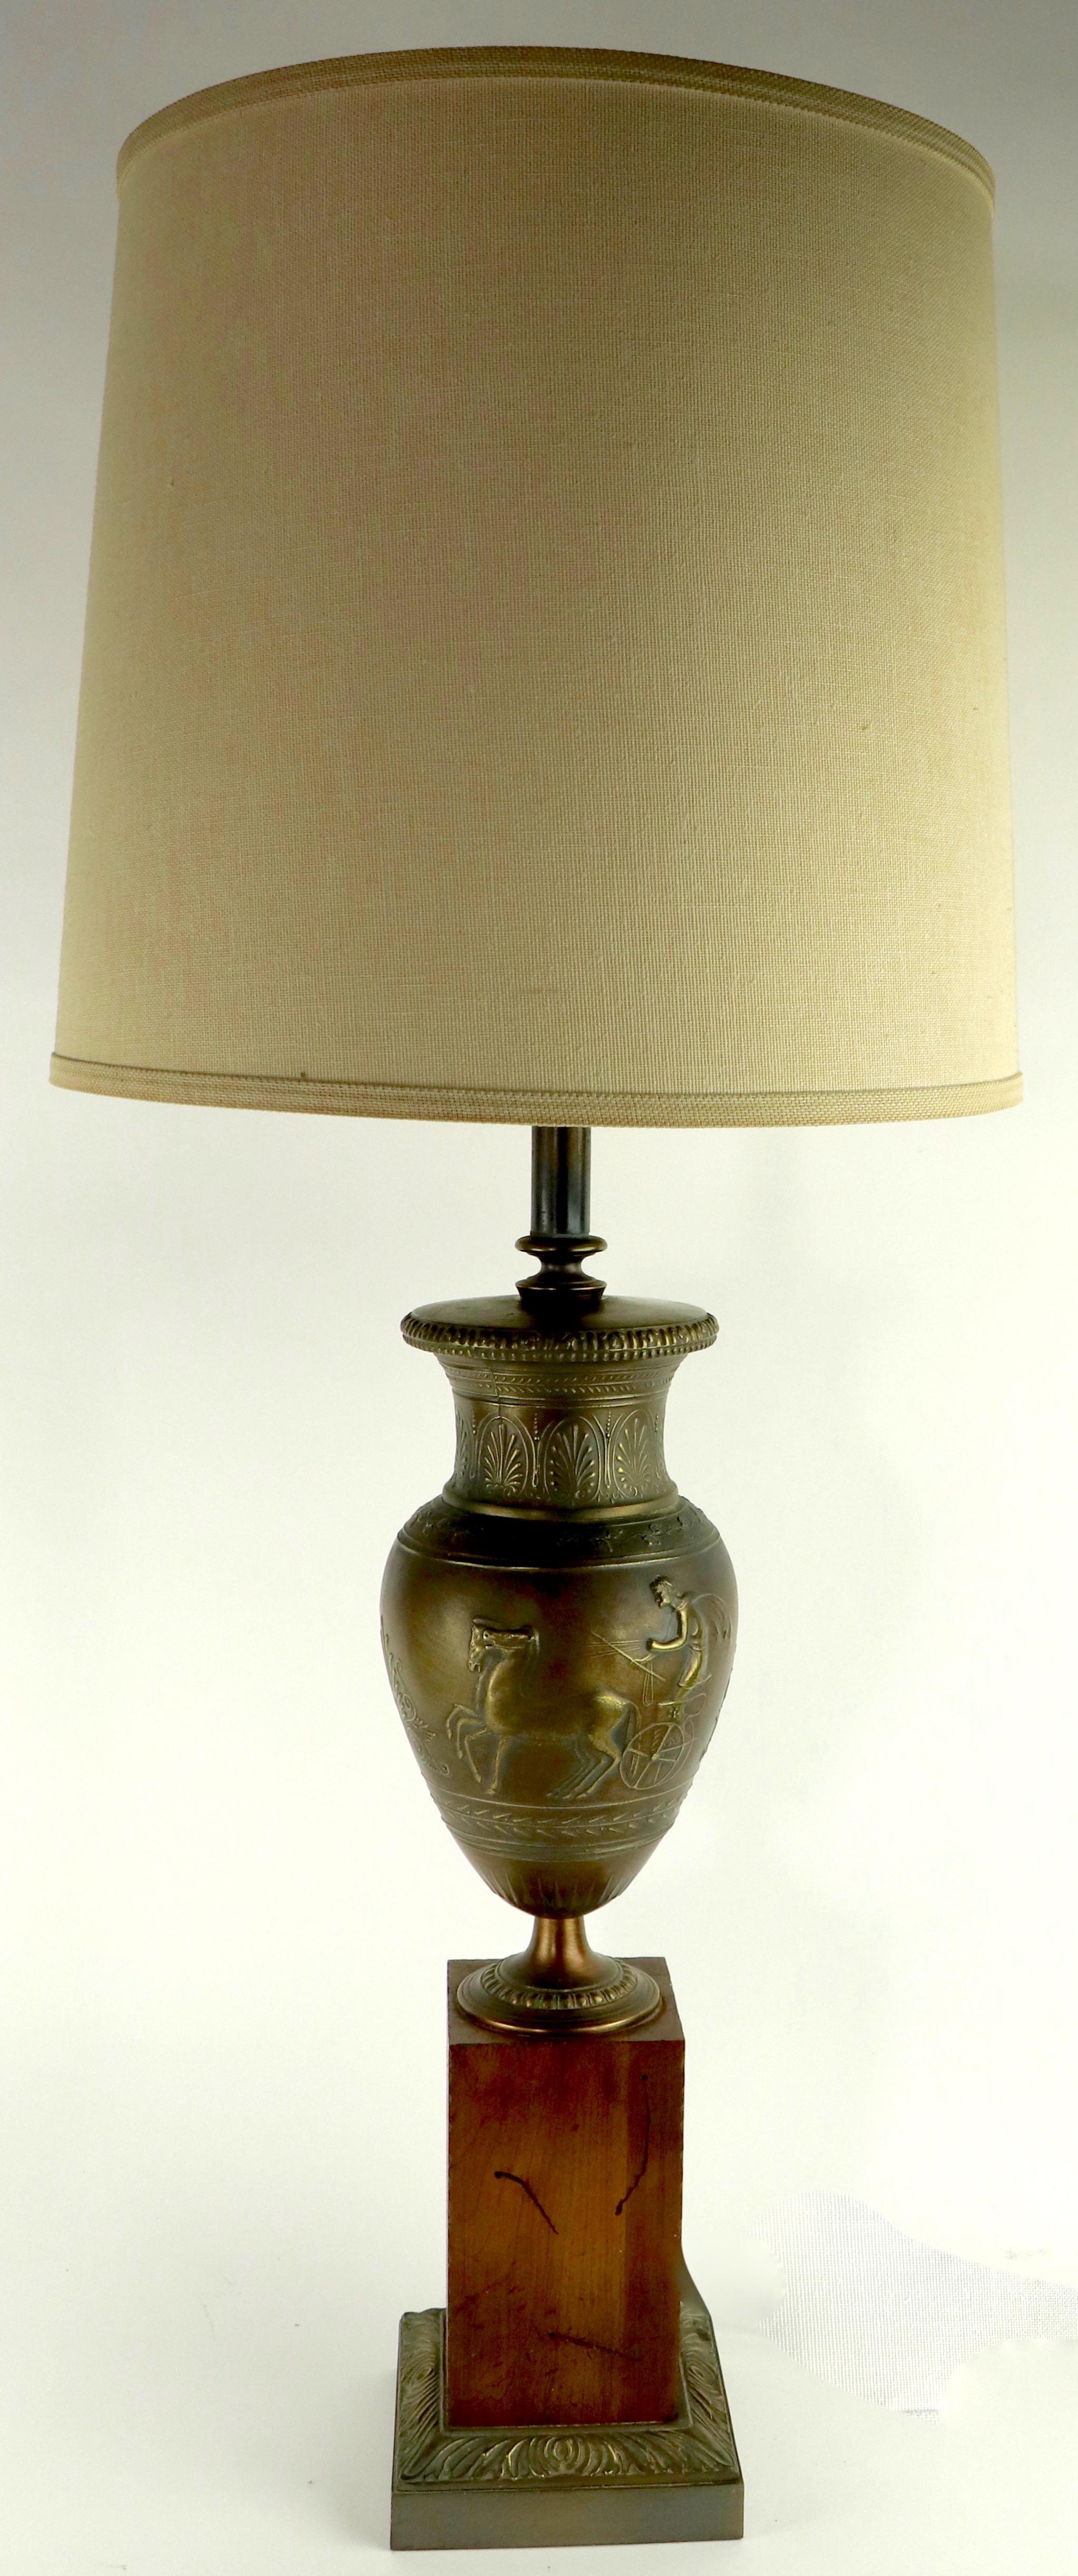 20th Century Greco Roman Style Table Lamp by Westwood Industries For Sale